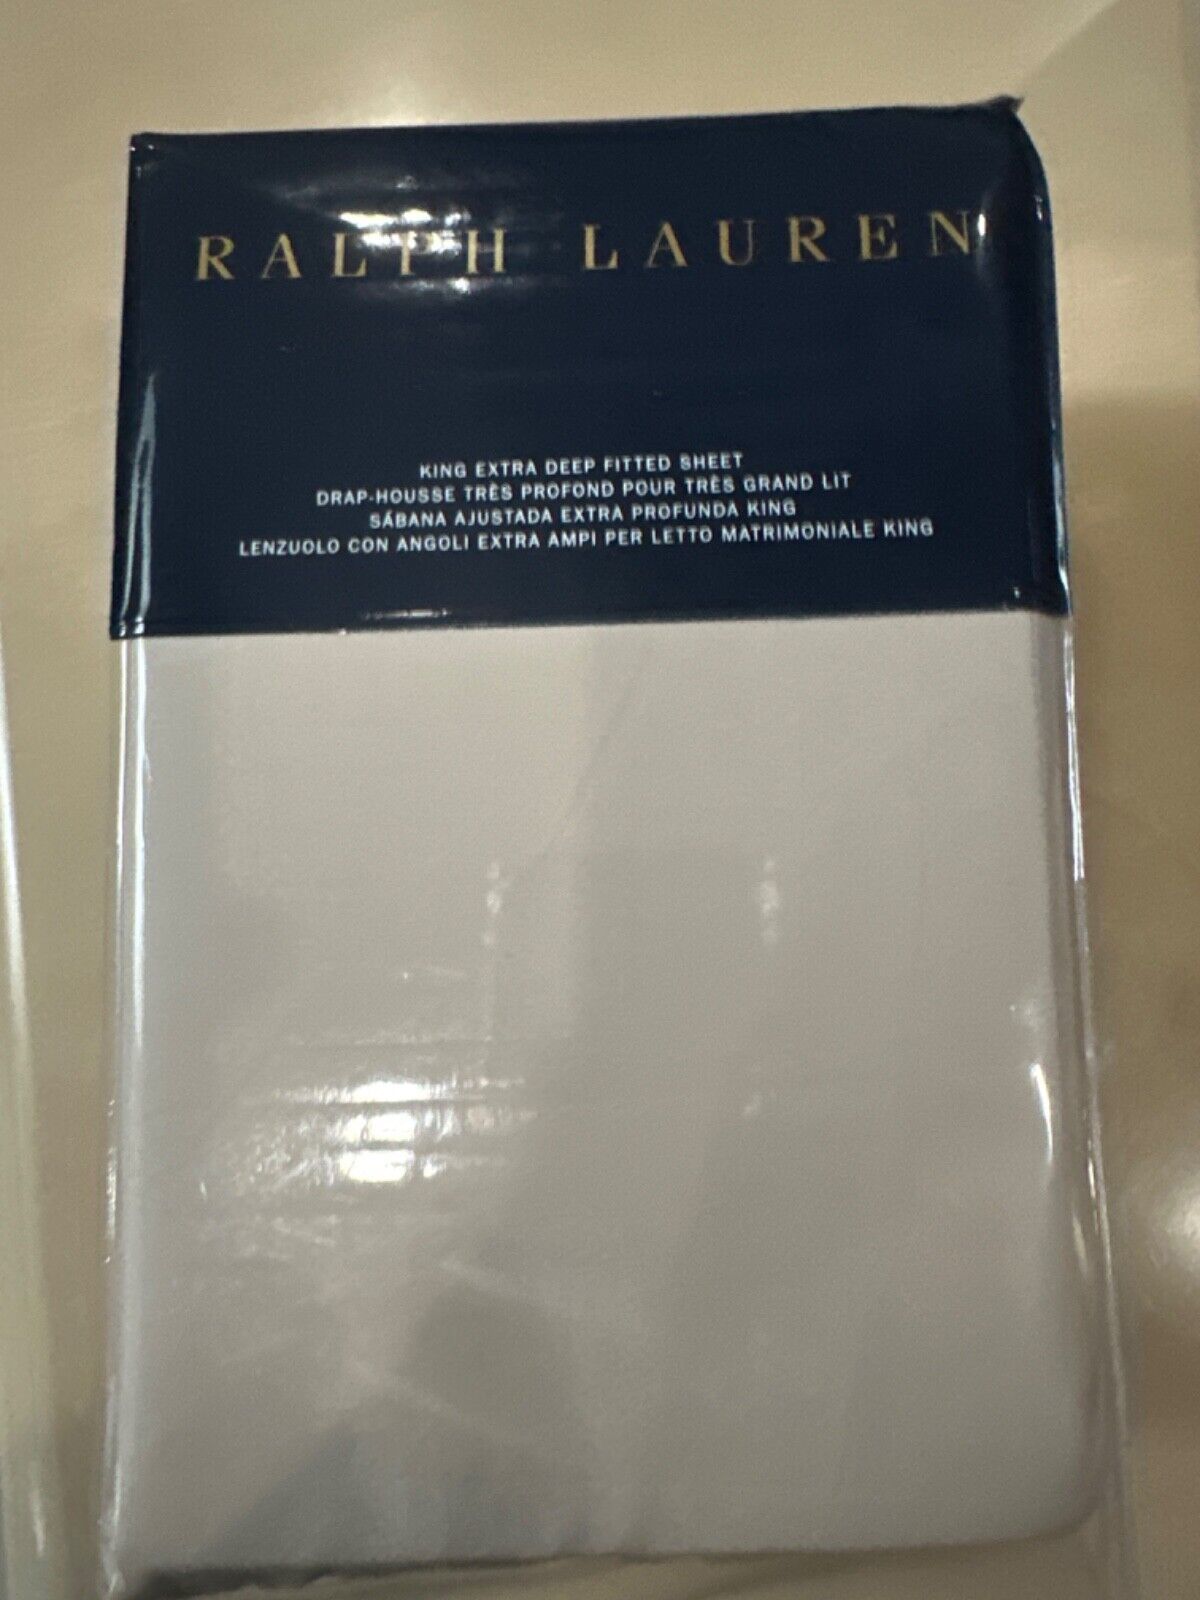 RALPH LAUREN 464 SOLID PERCALE 1pc EXTRA DEEP KG FITTED SHEET PALE FLANNEL NIP - $83.85